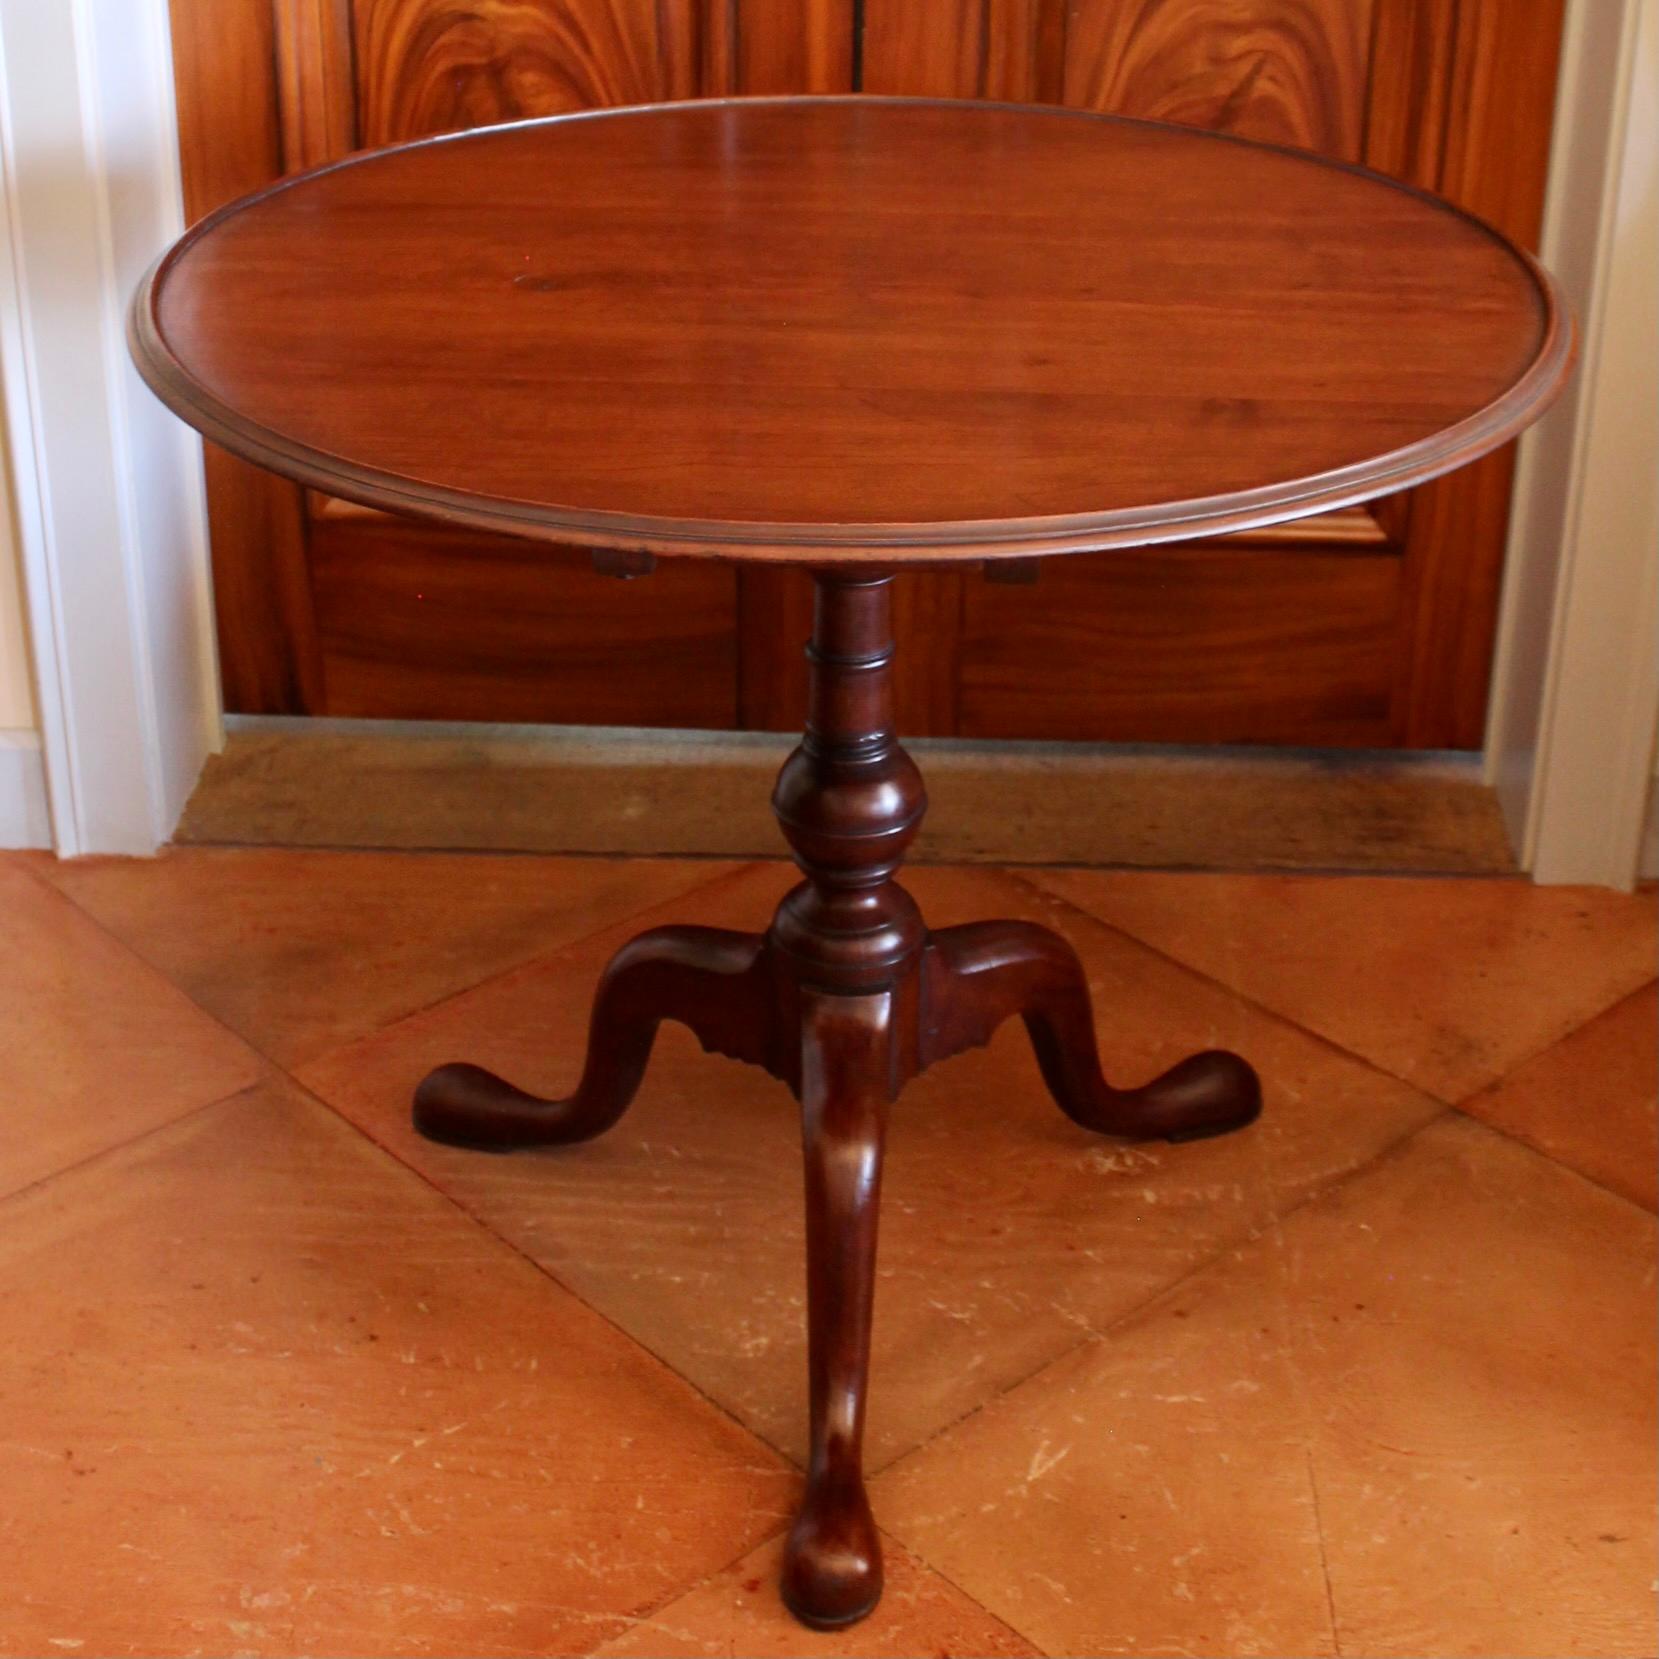 A handsome medium toned cherry three board top with a tight moulded edge, resting on a baluster base with multiple turnings, most notably the banded sphere anchoring the standard. The birdcage has a nicely formed pin and separate catch plate. Robust